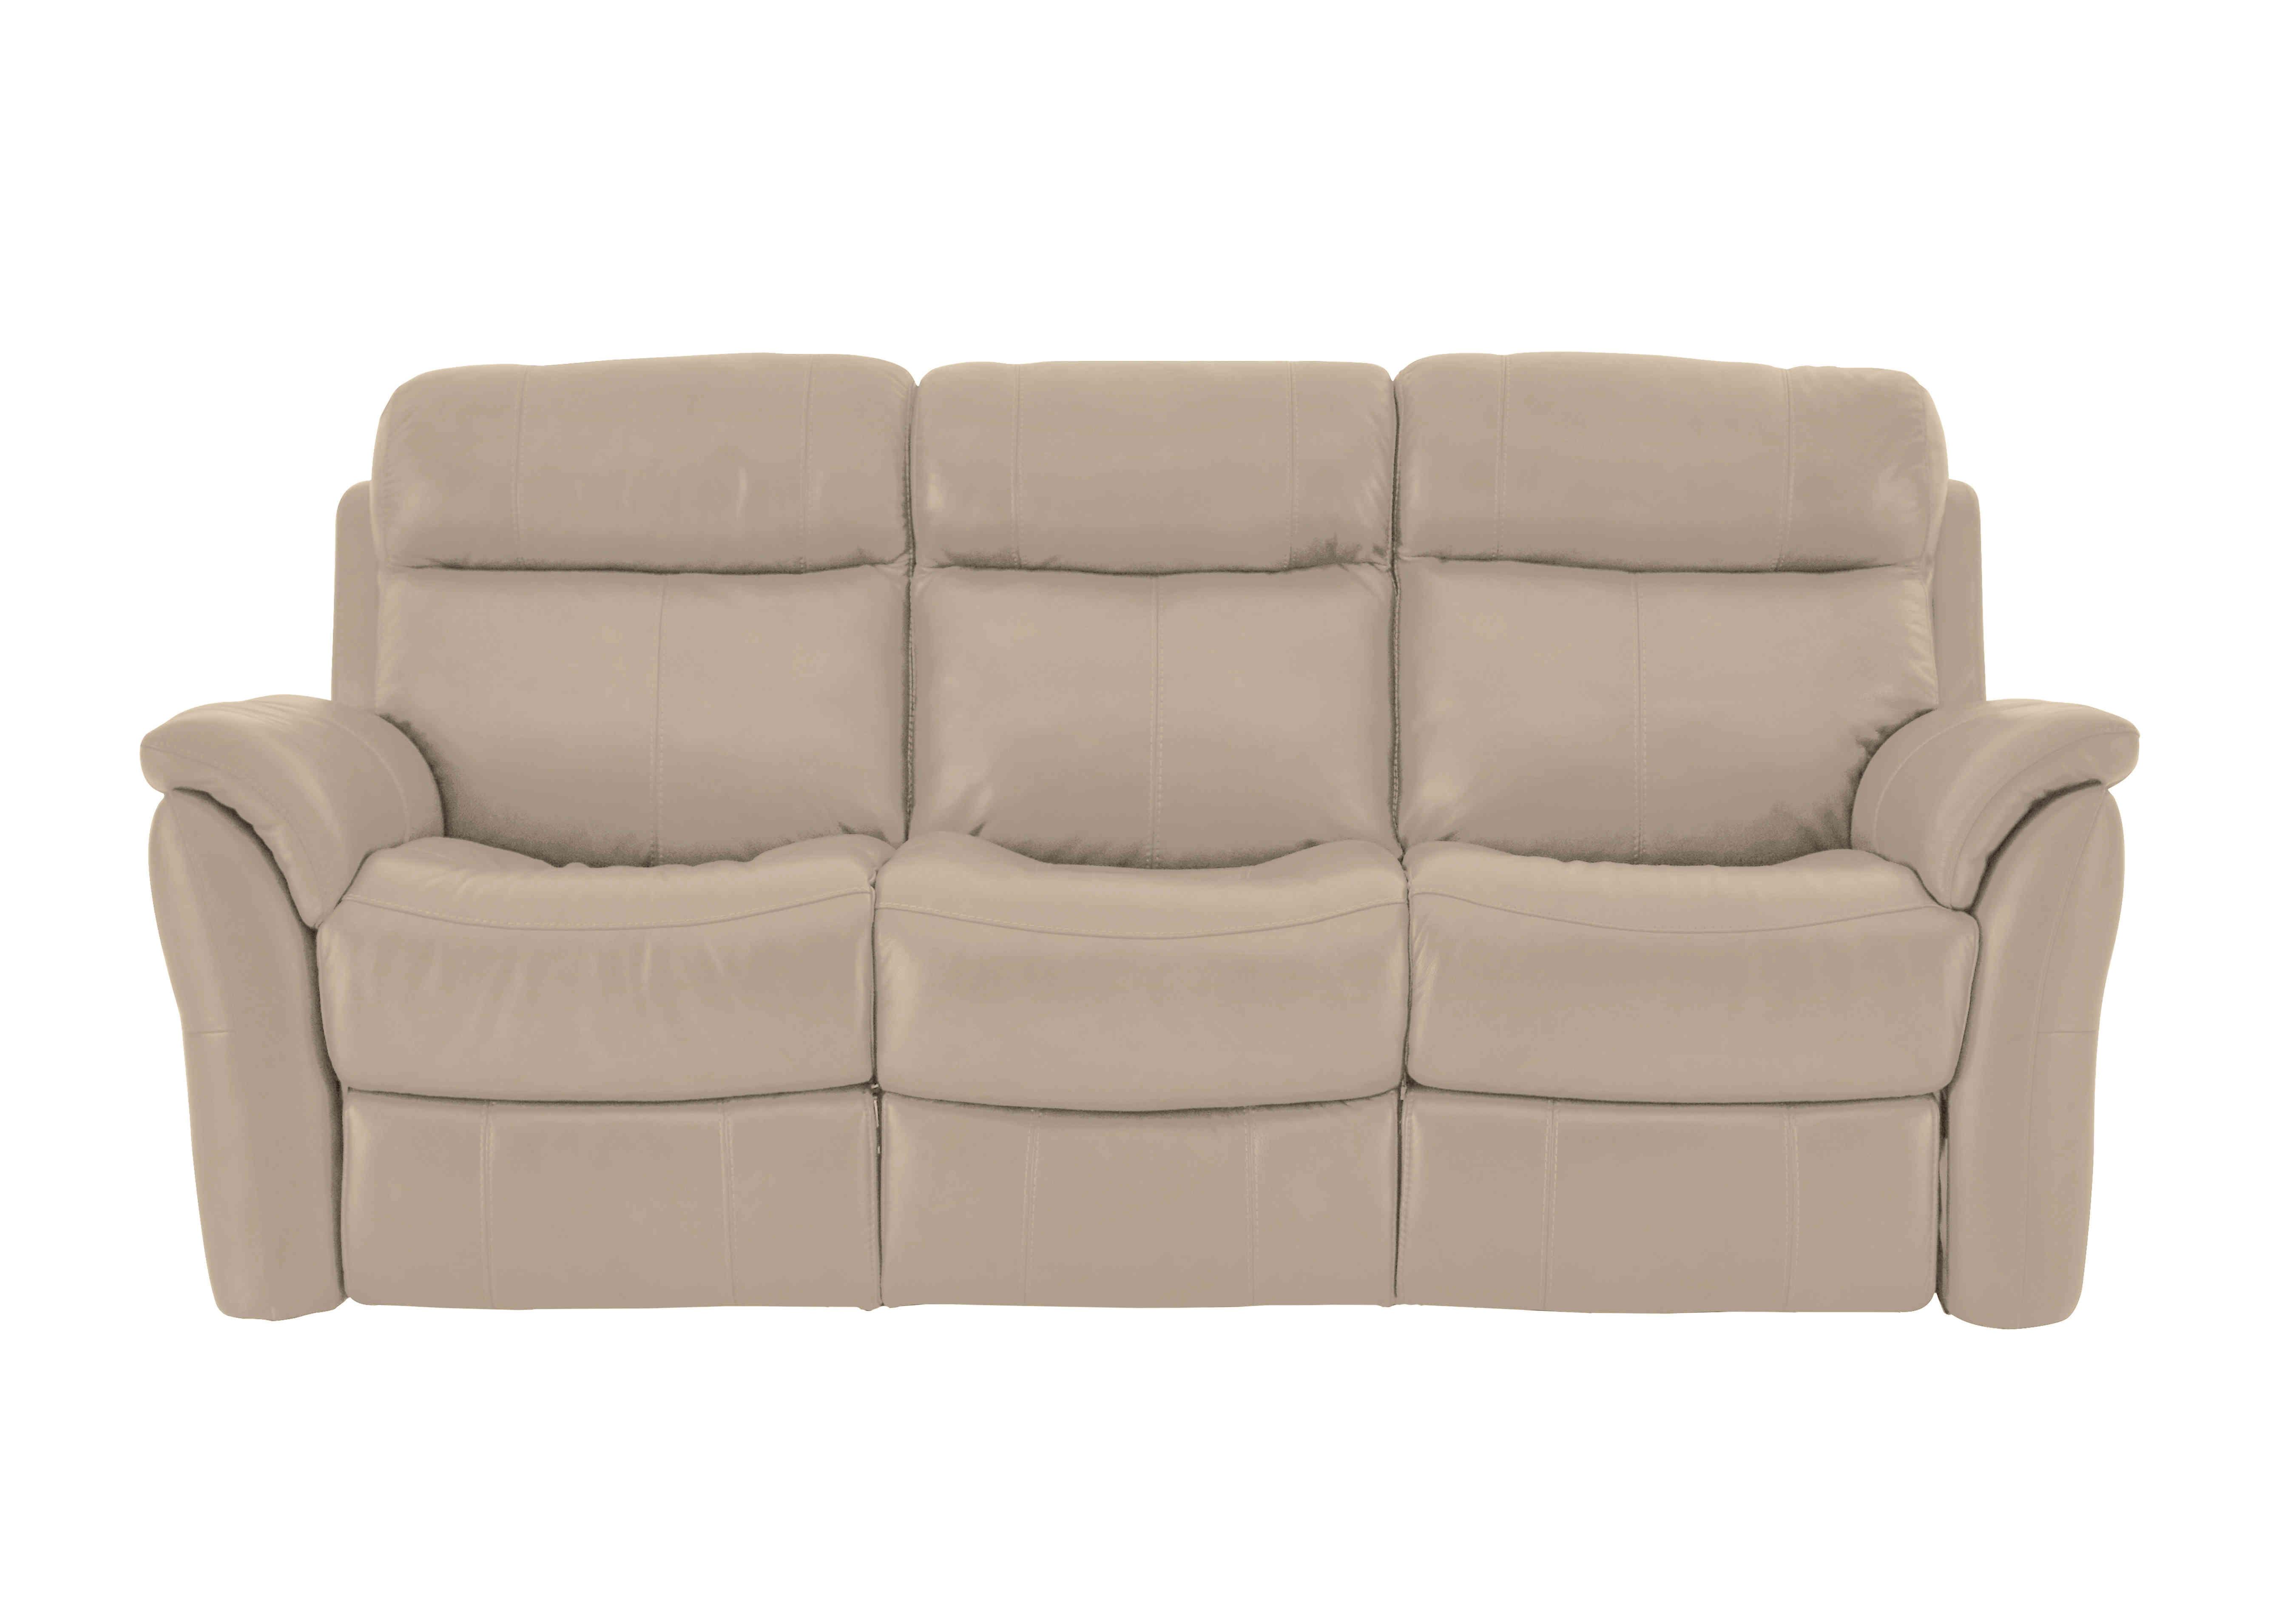 Relax Station Revive 3 Seater Leather Sofa in Bv-039c Pebble on Furniture Village